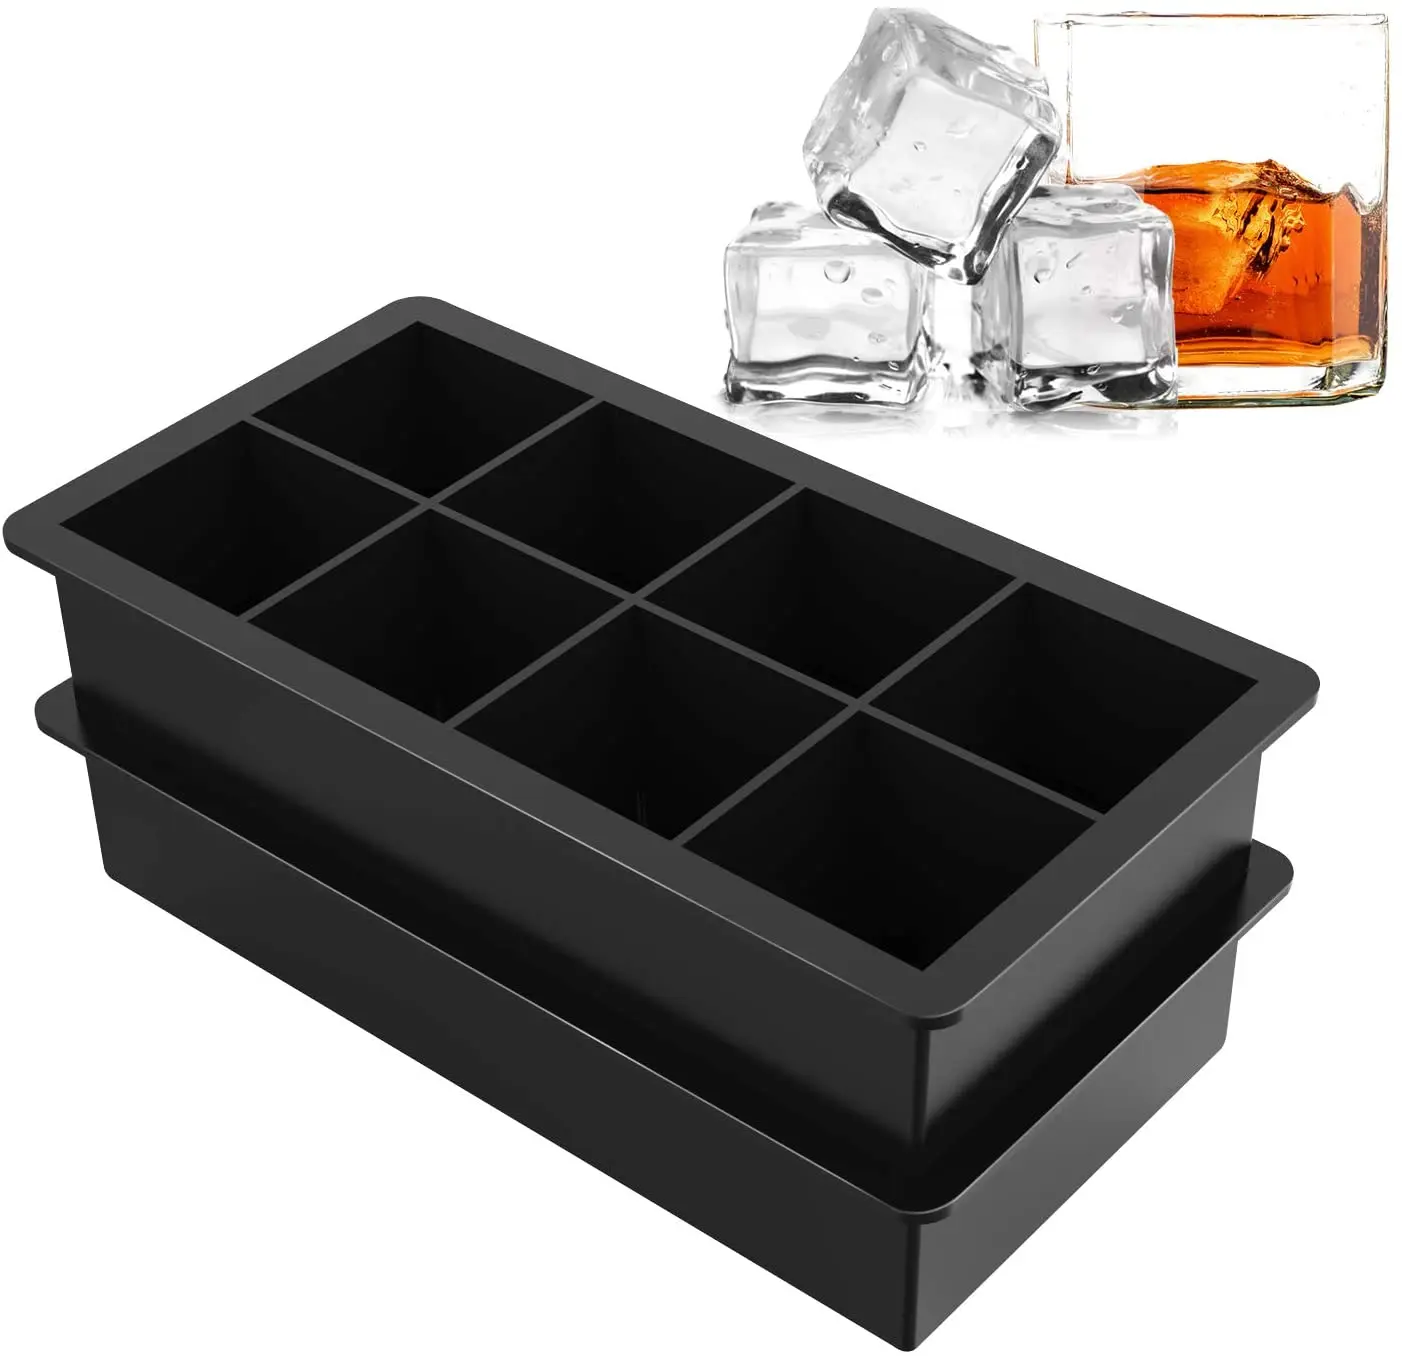 

2 Pack Large Silicone Ice Cube Trays 8 Square Cavities per Tray Ideal for Whiskey Cocktails Soups Baby Food and Frozen Treats